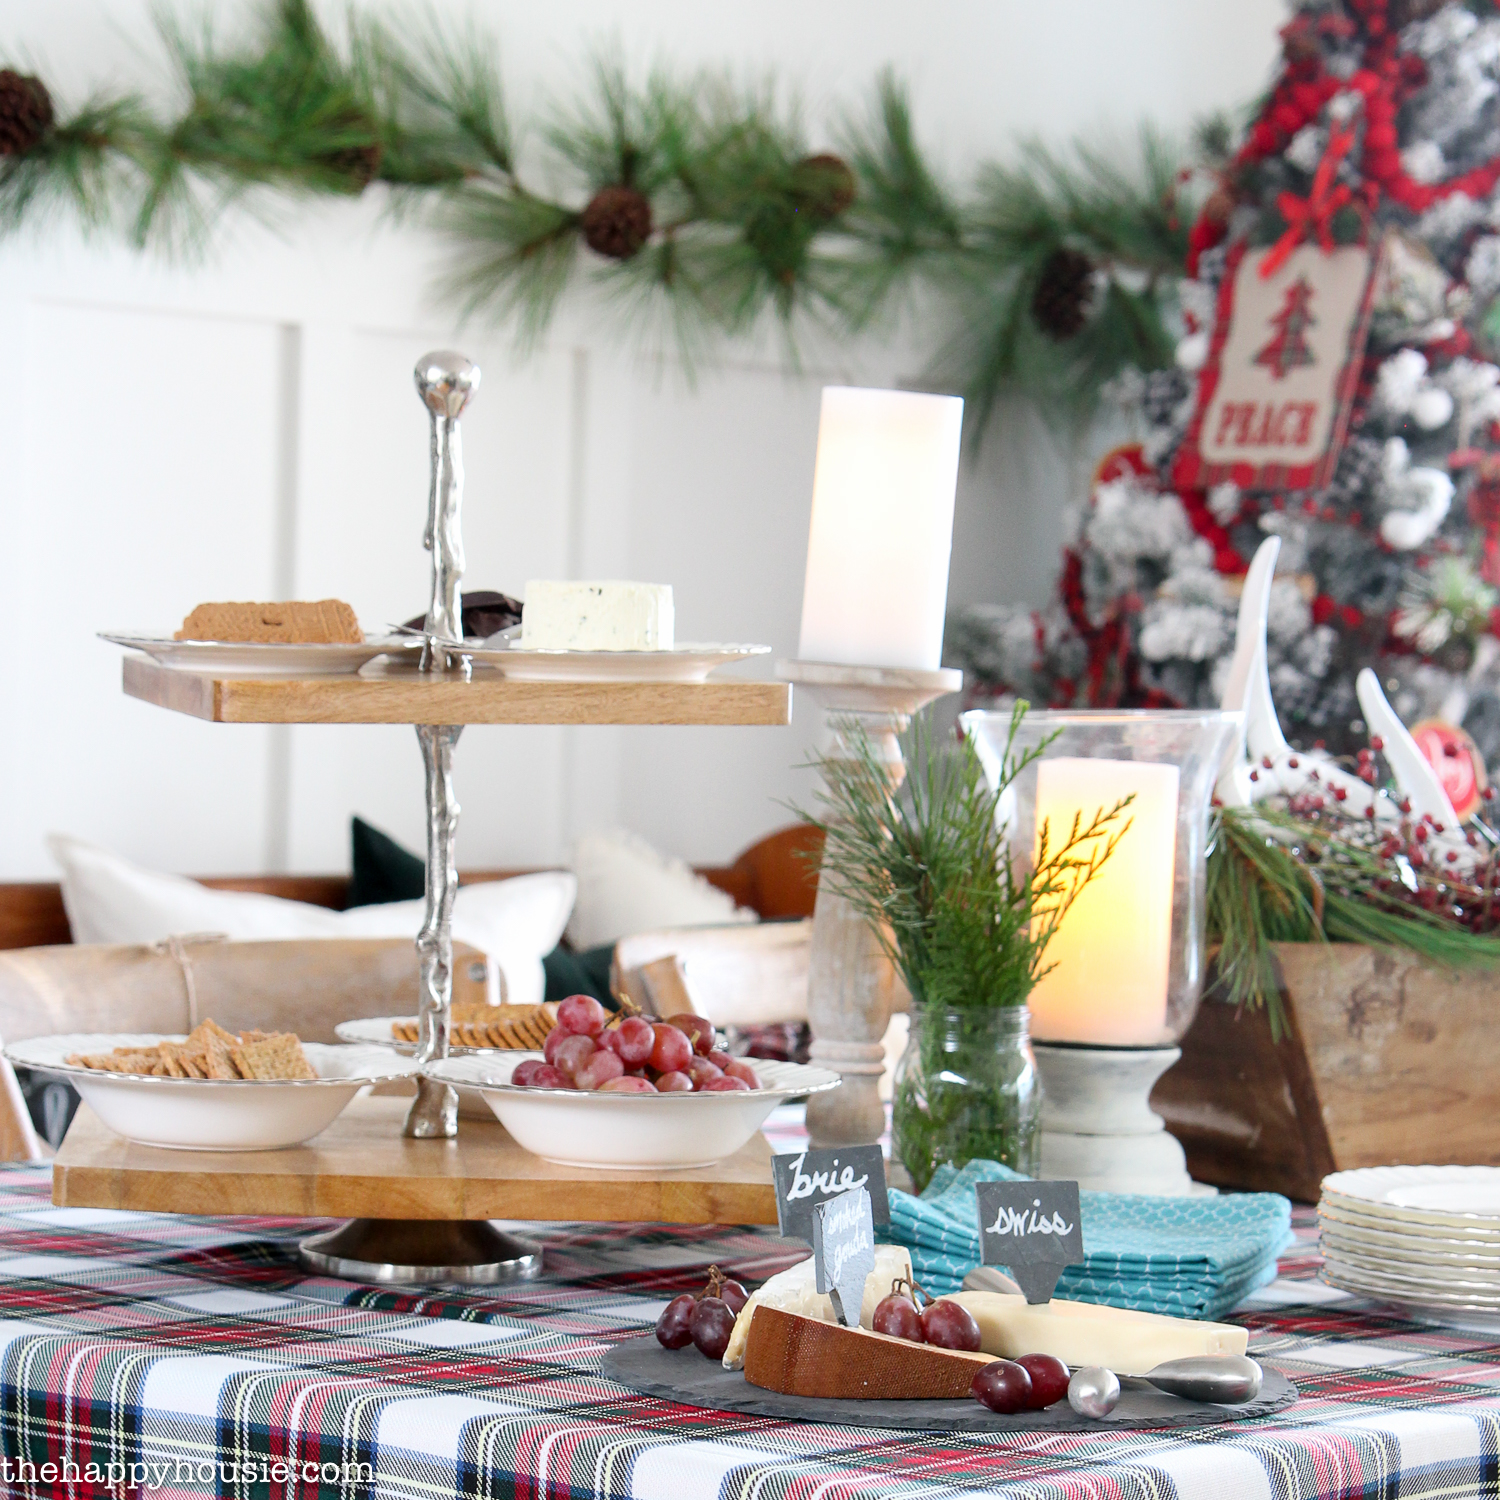 How to Setup a Wine & Cheese Party for Holiday Entertaining